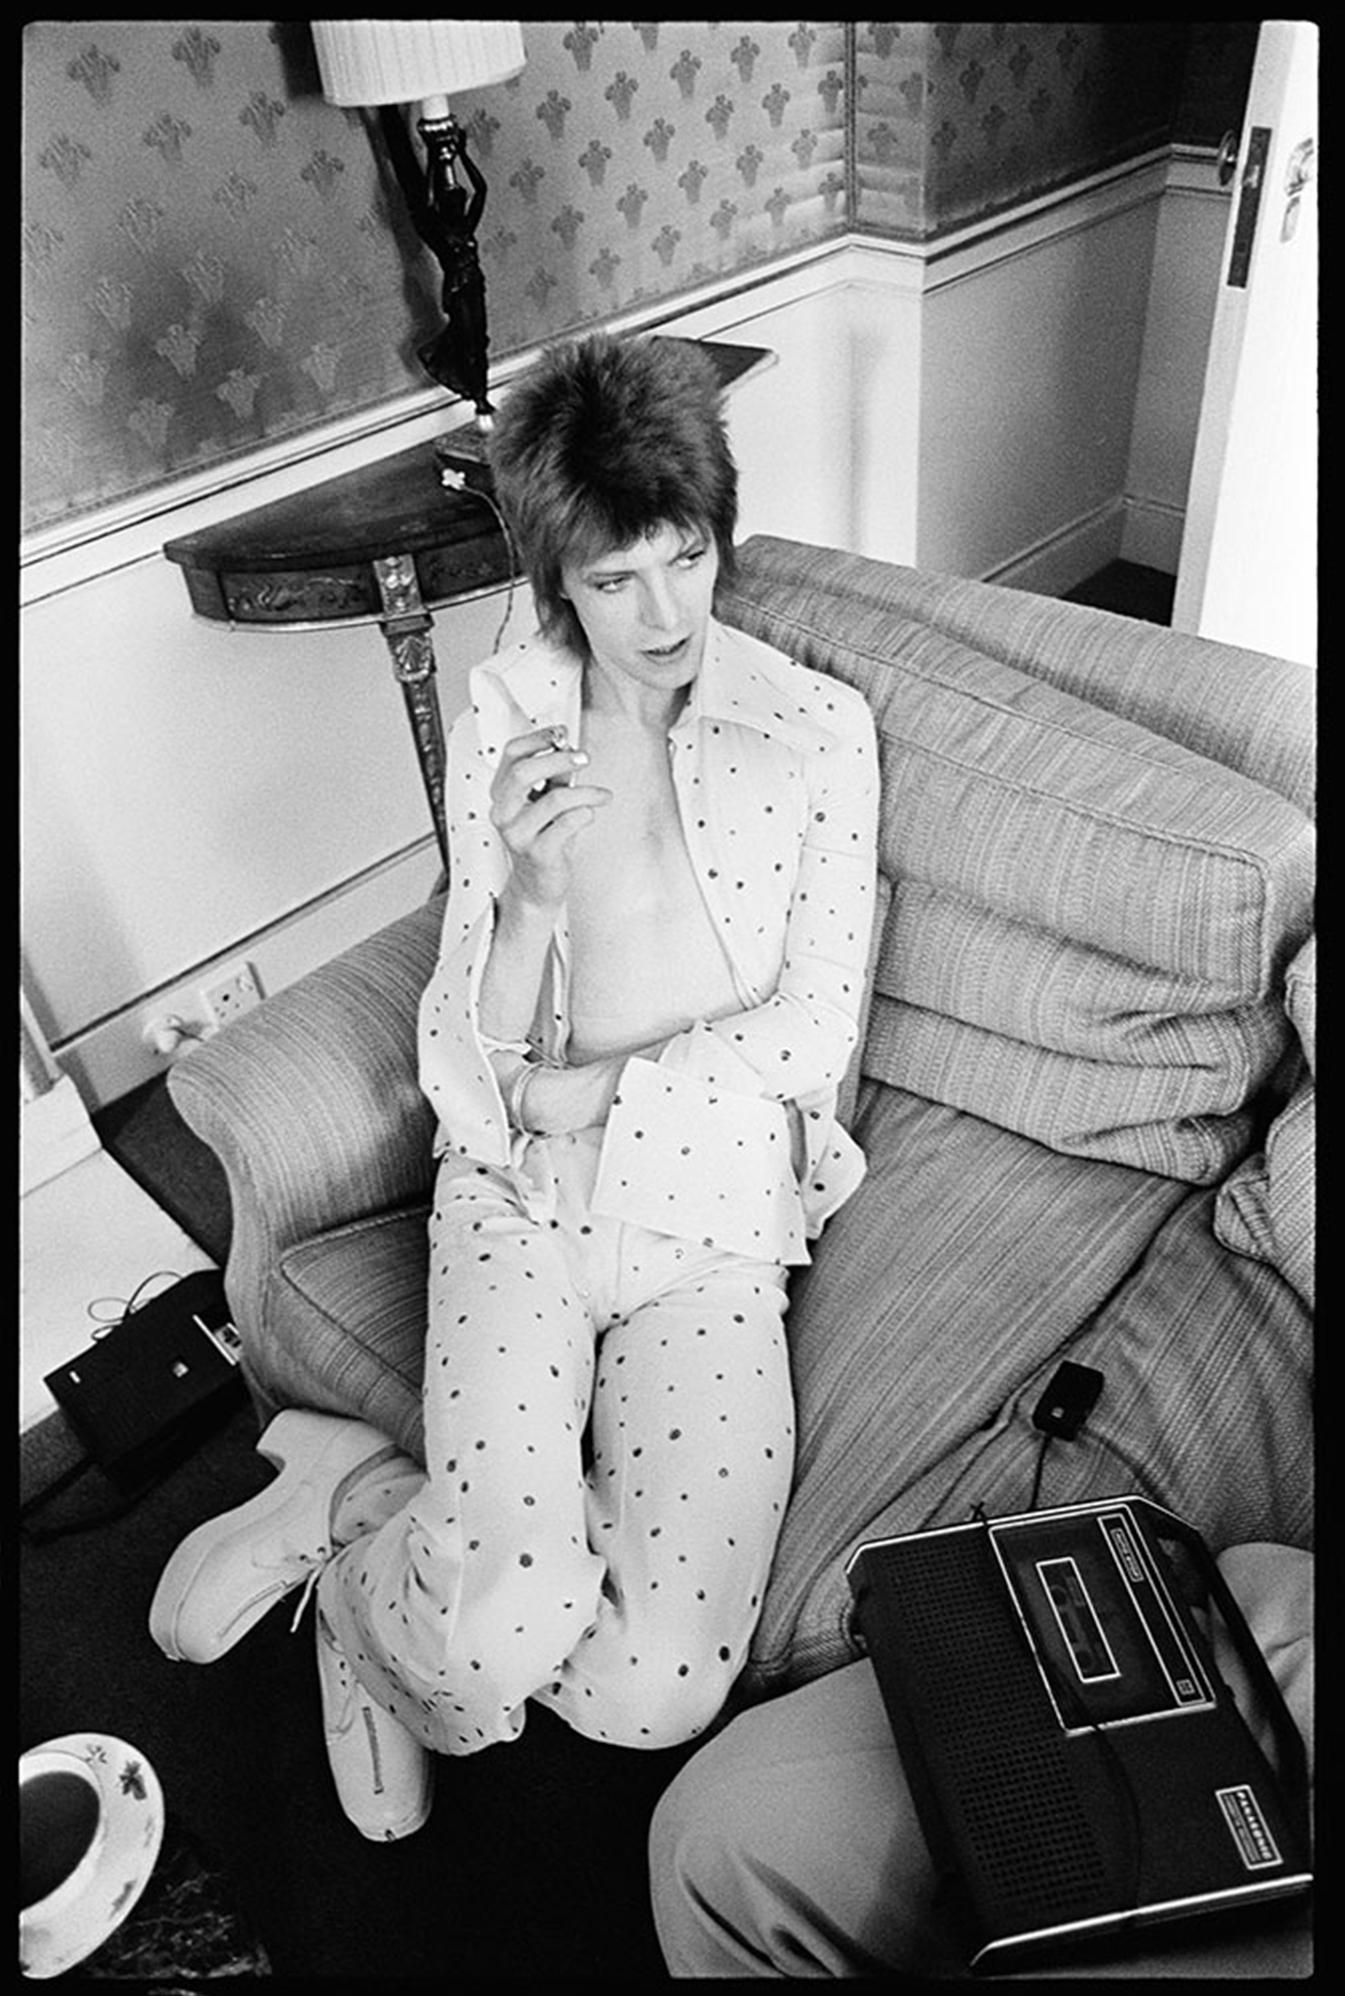 Alec Byrne Black and White Photograph - David Bowie at The Dorchester Hotel 1972 - Artist Proof Print